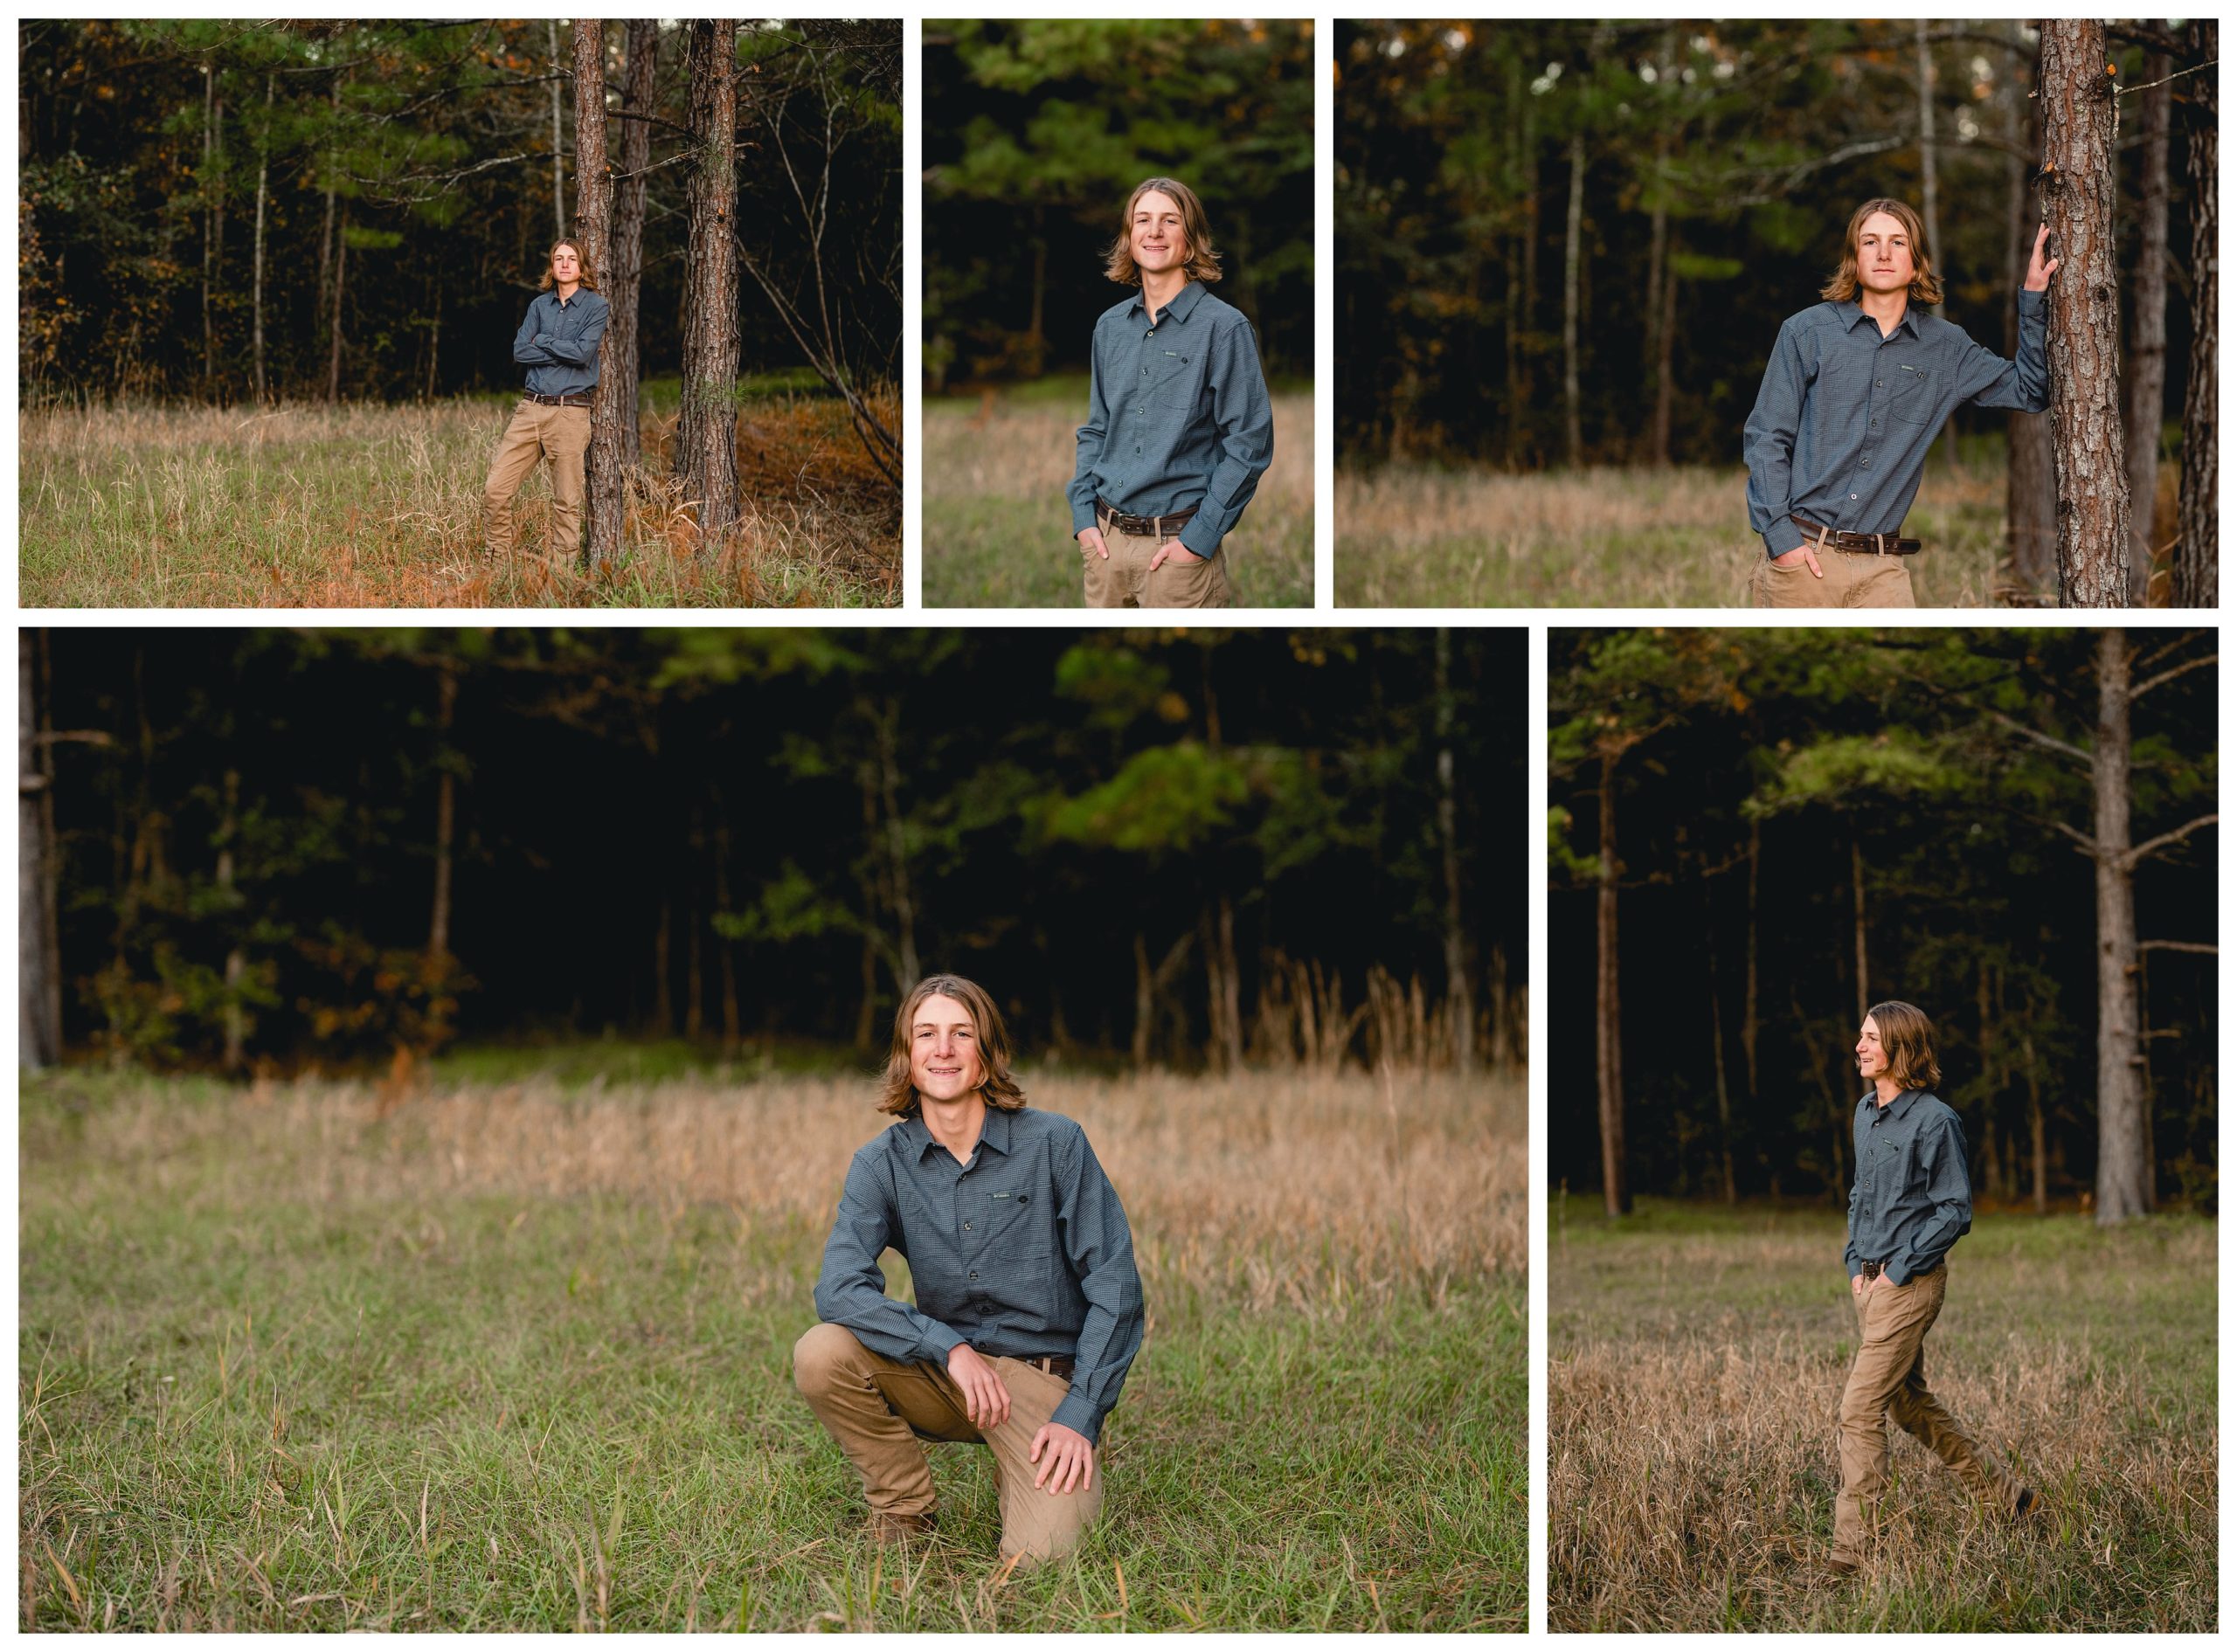 Male senior photos taken in a field by pro photographer in Live Oak, Florida.